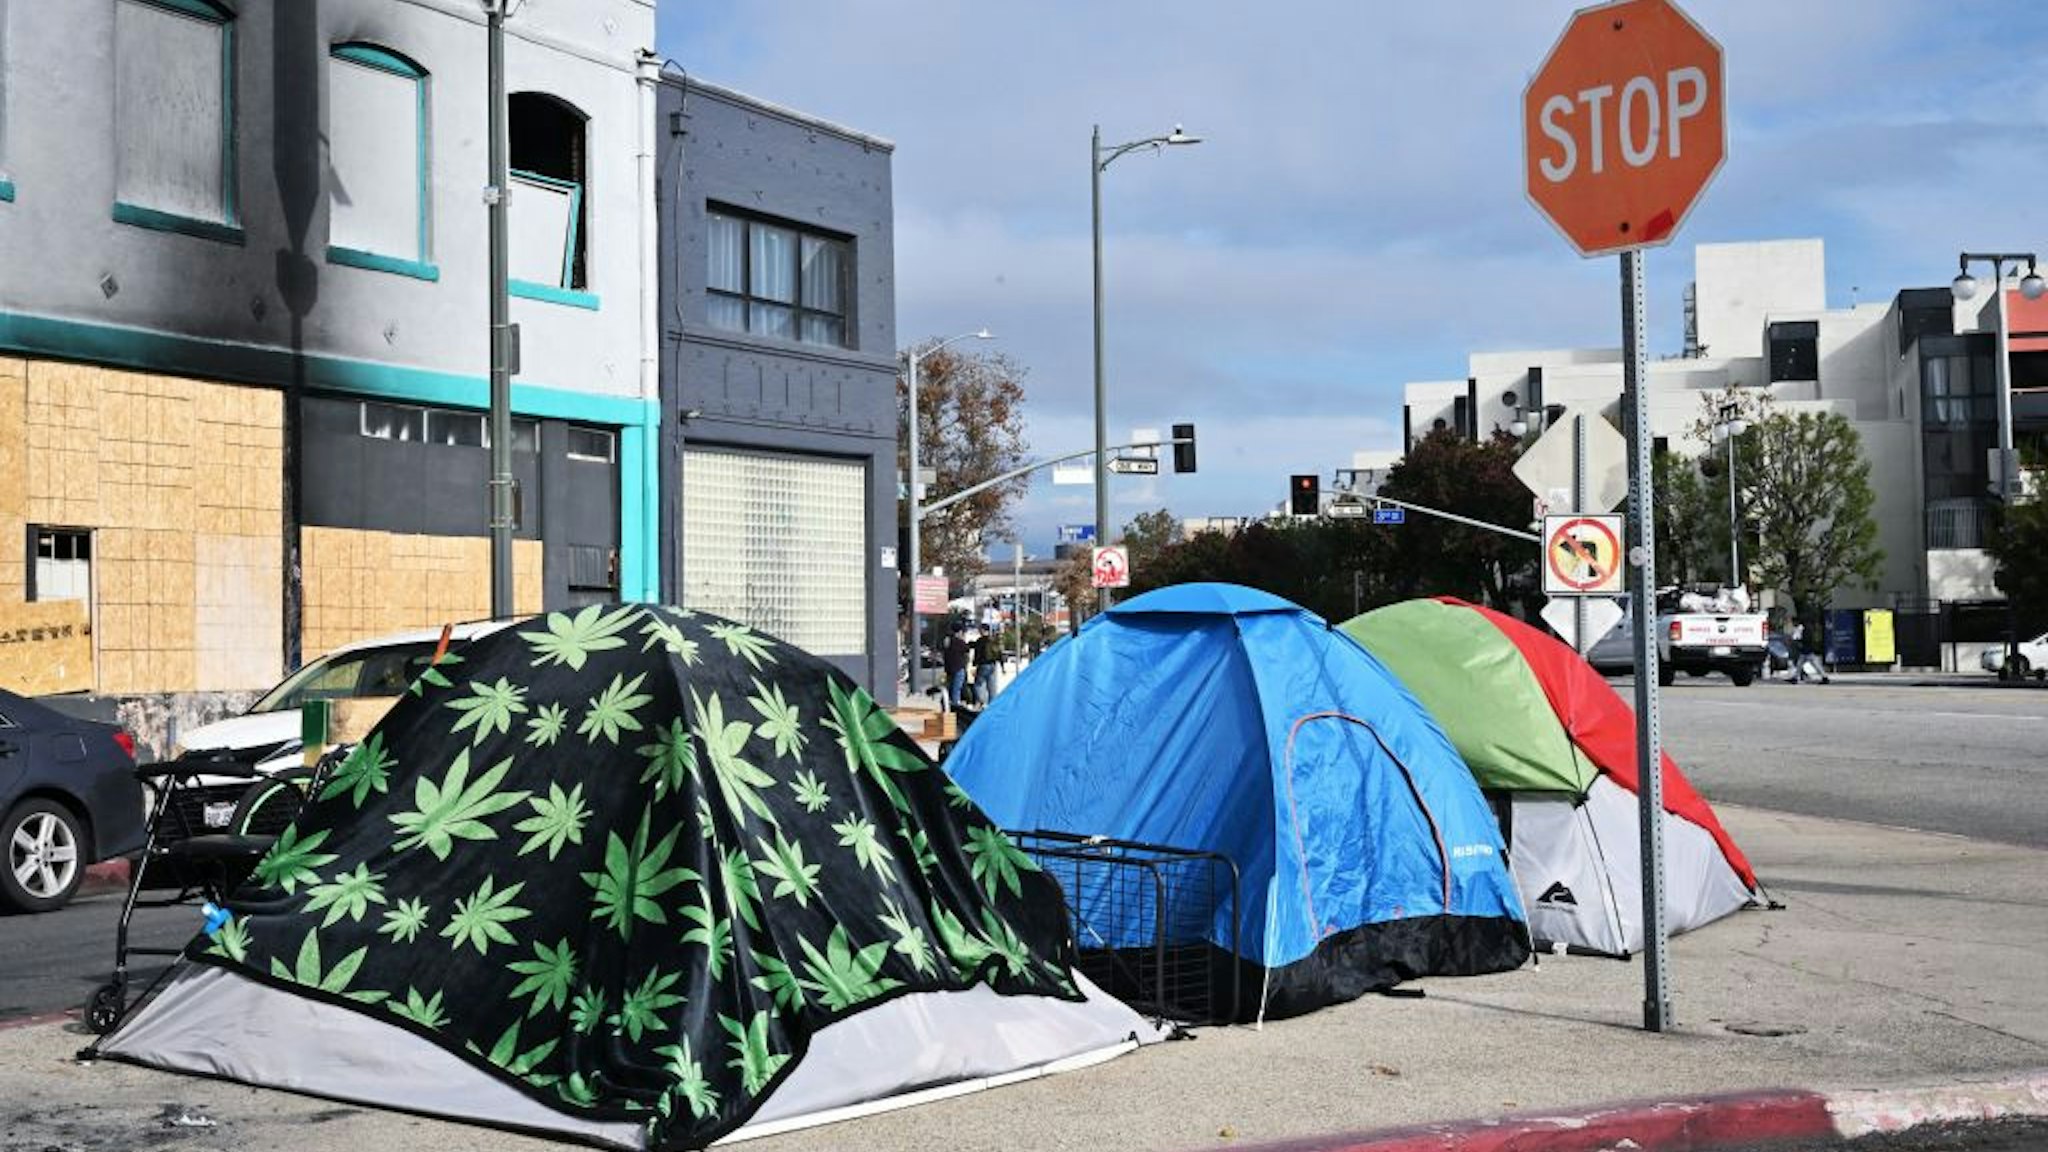 Tents for the homeless line a street corner in Los Angeles, California, on December 6, 2022. - A state of emergency over spiralling levels of homelessness was declared in Los Angeles December 12,2022 as the new mayor Karen Bass pledged a "seismic shift" for America's second biggest city. Tens of thousands of people sleep rough on Los Angeles' streets, in an epidemic that shocks many visitors to one of the wealthiest urban areas on the planet. Mayor Karen Bass, who was sworn into office Sunday, used her first full day in office to declare a state of emergency. (Photo by Frederic J. BROWN / AFP) (Photo by FREDERIC J. BROWN/AFP via Getty Images)